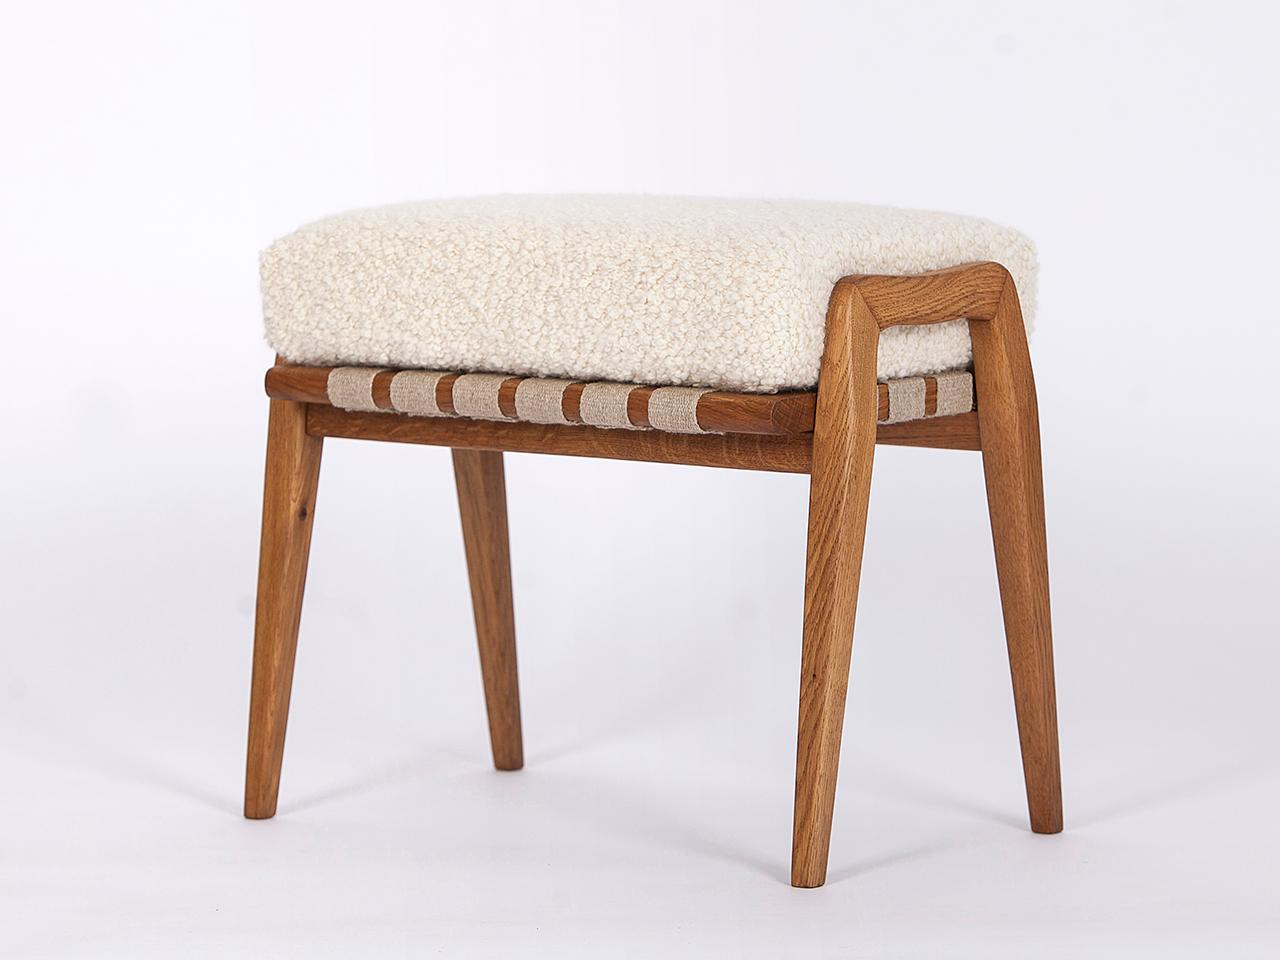 This midcentury stool footstool was made in the 1960s in former Czechoslovakia. Solid ash with hemp straps. The removable upholstery consists of a coconut fiber core, covered with a wonderful bouclé fabric made of soft wool and alpaca from the